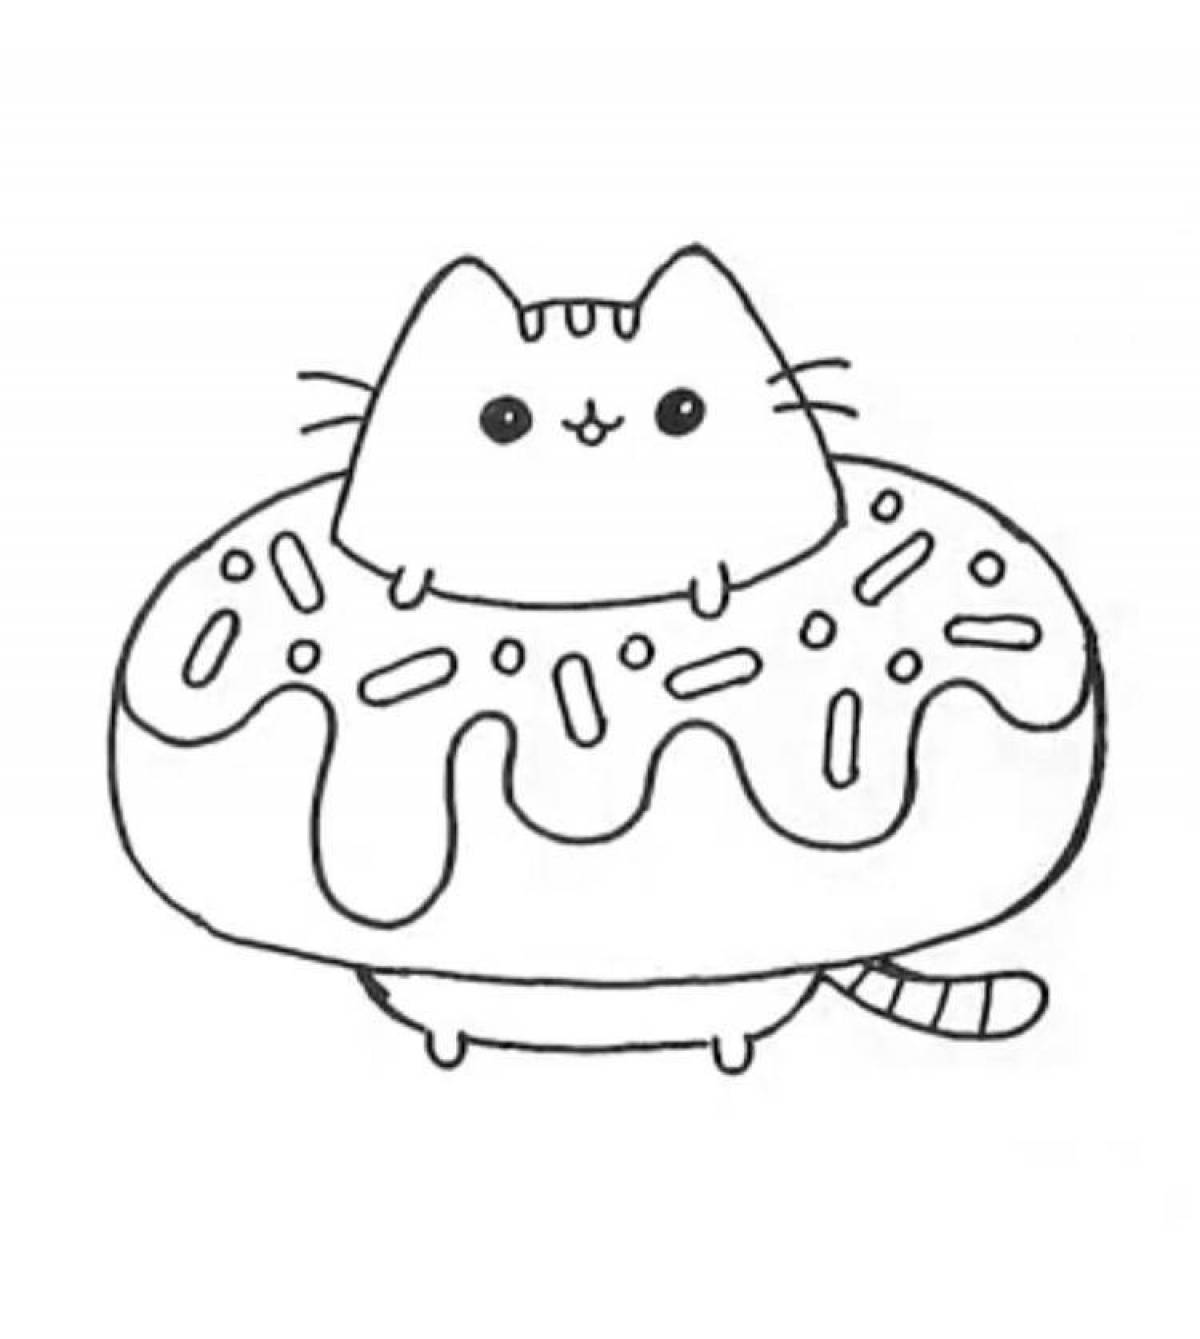 Cute and mischievous cat coloring page